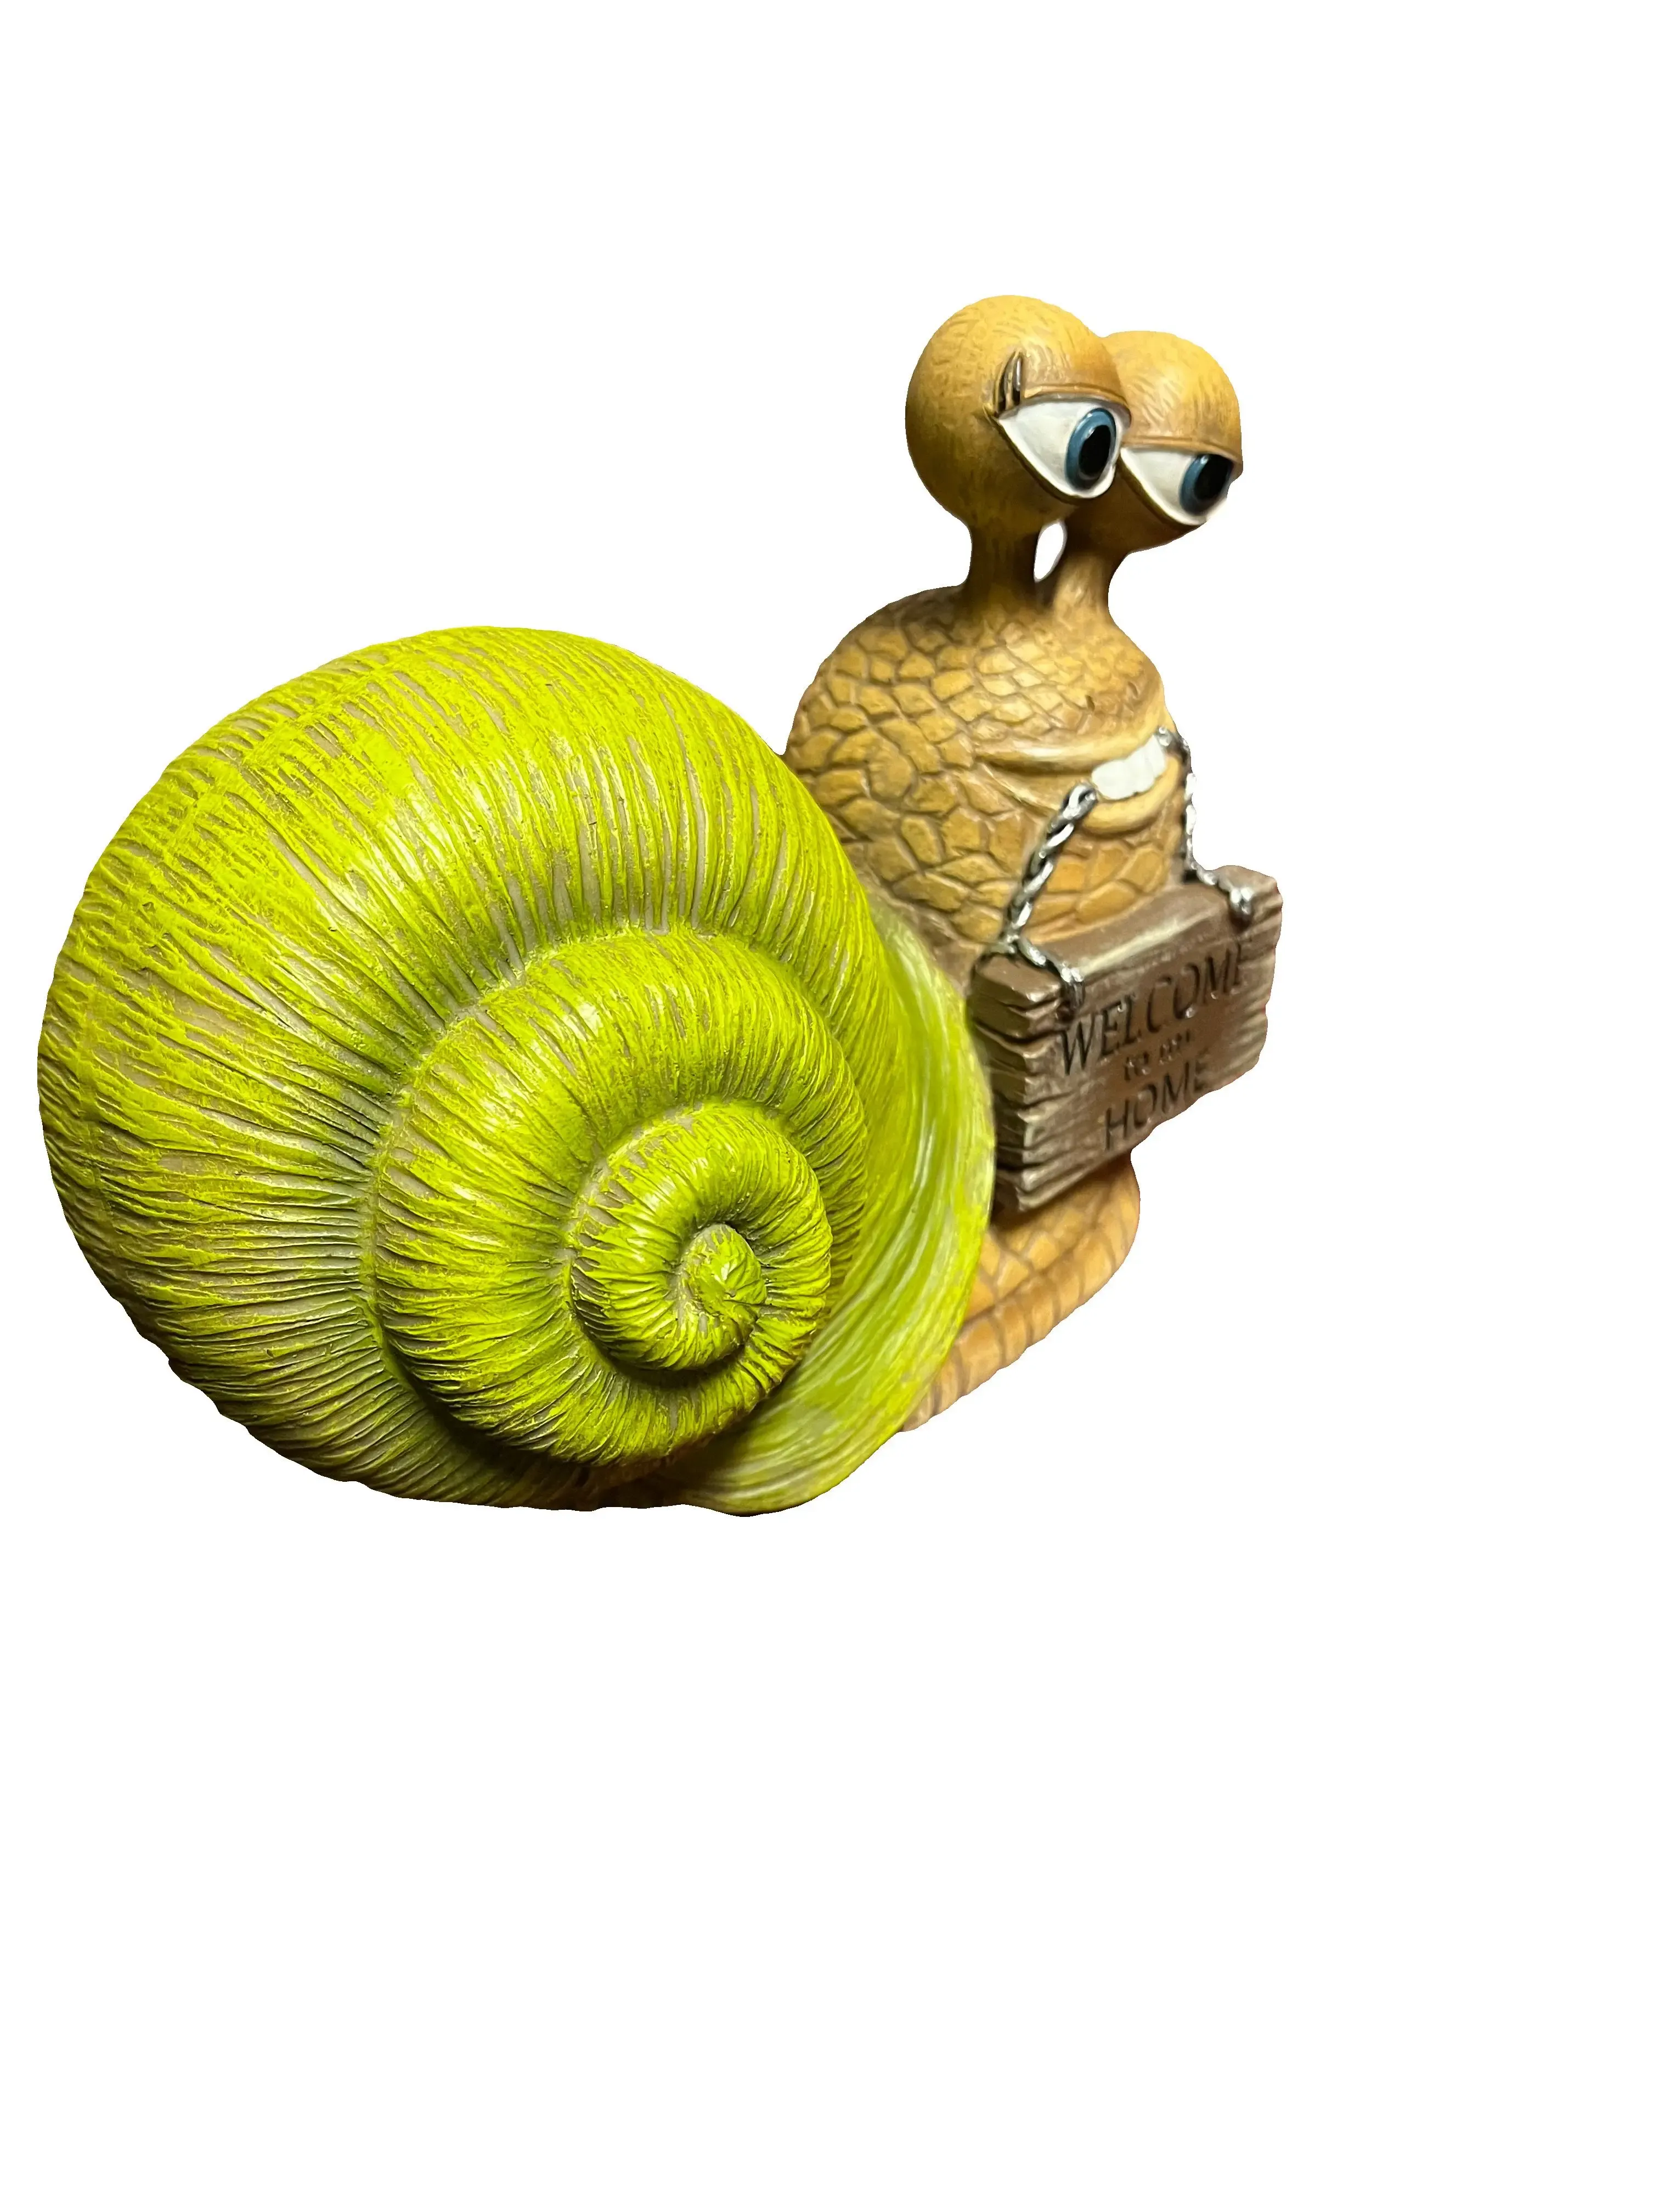 Forest Snail